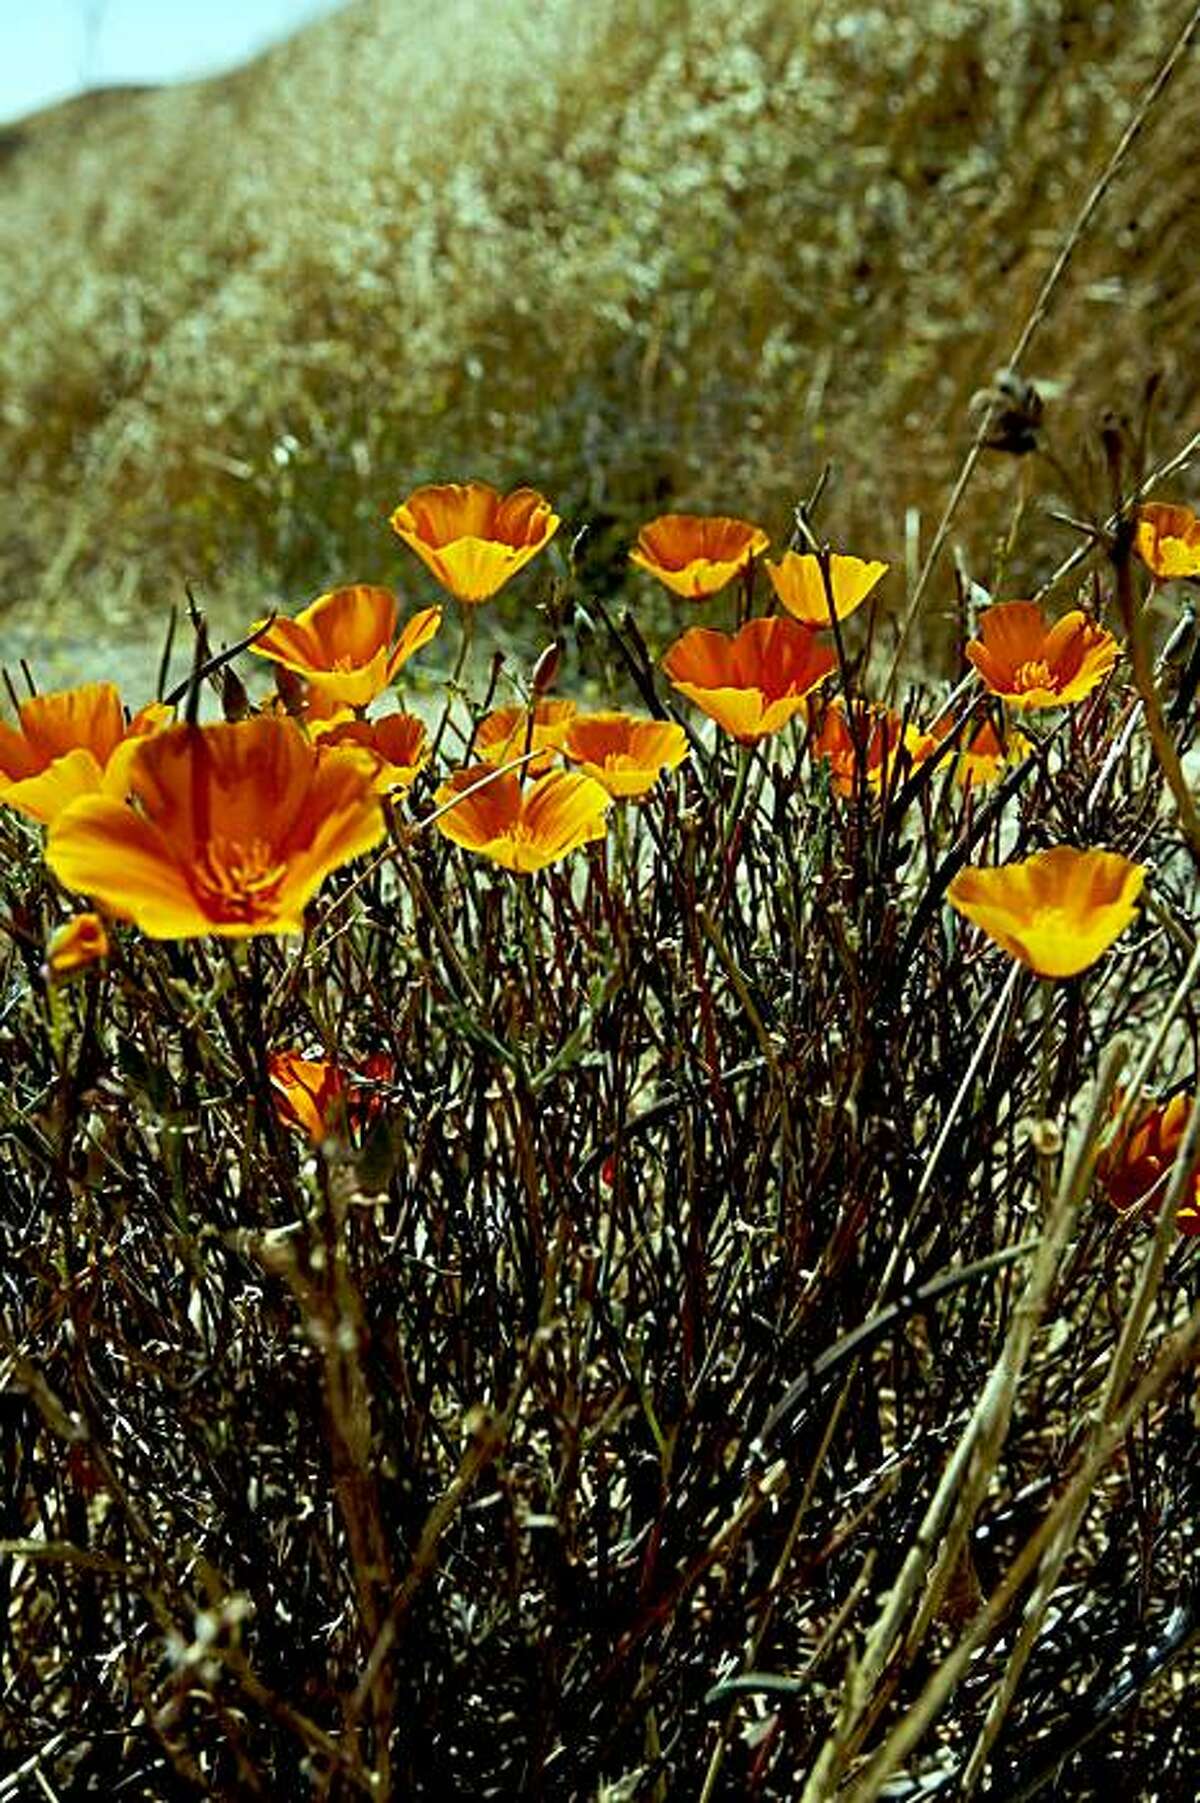 Wild California poppies growing on the newly acquired parcel of land negotiated by the Muir Heritage Land Trust in Hercules, Calif. on Thursday, Aug. 7, 2008.